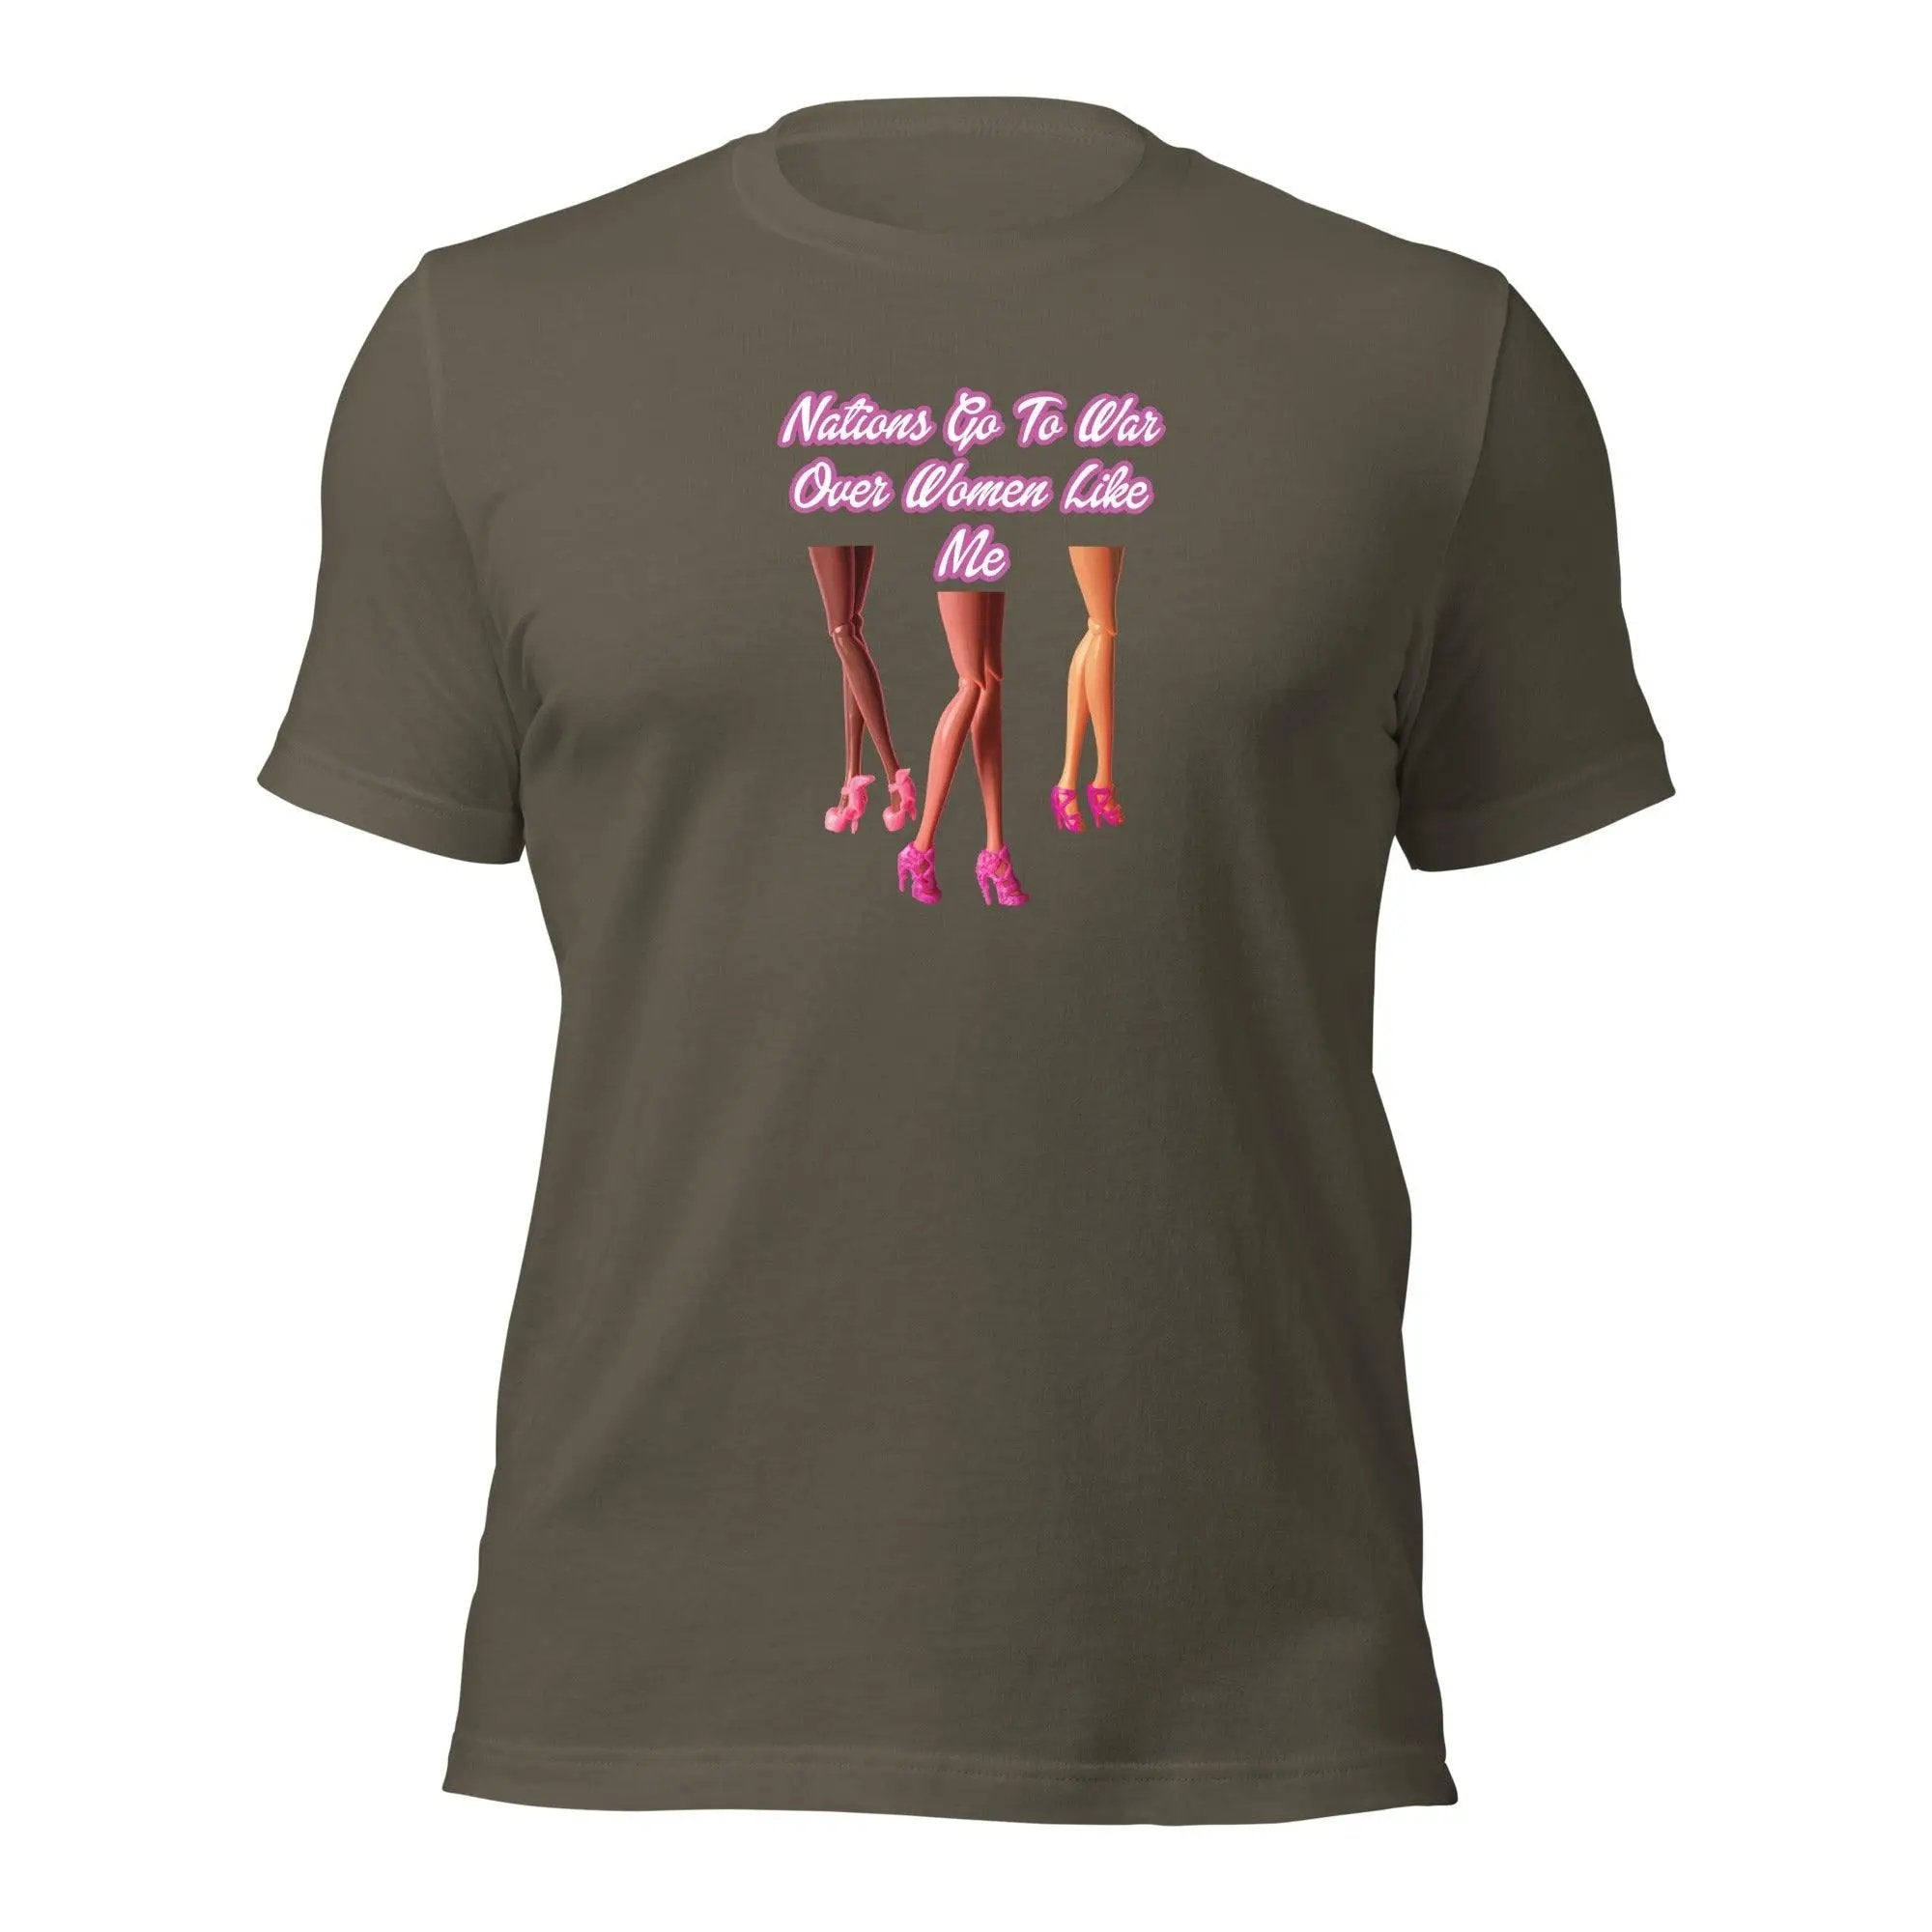 Nations Go To War Over Women Like Me Unisex t-shirt